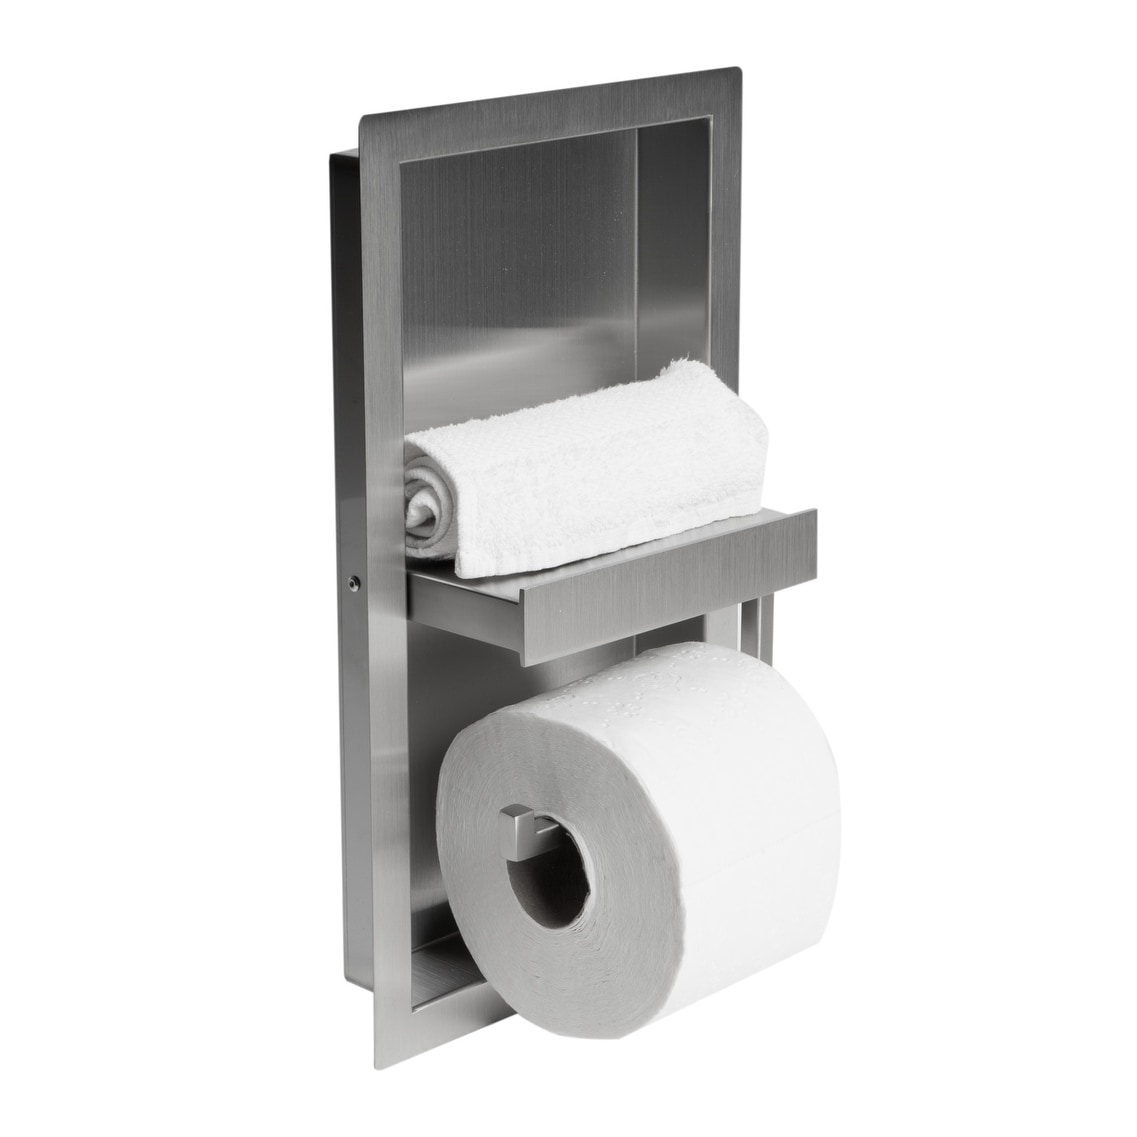 ALFI brand ABTPC77 Stainless Steel Recessed Toilet Paper Holder